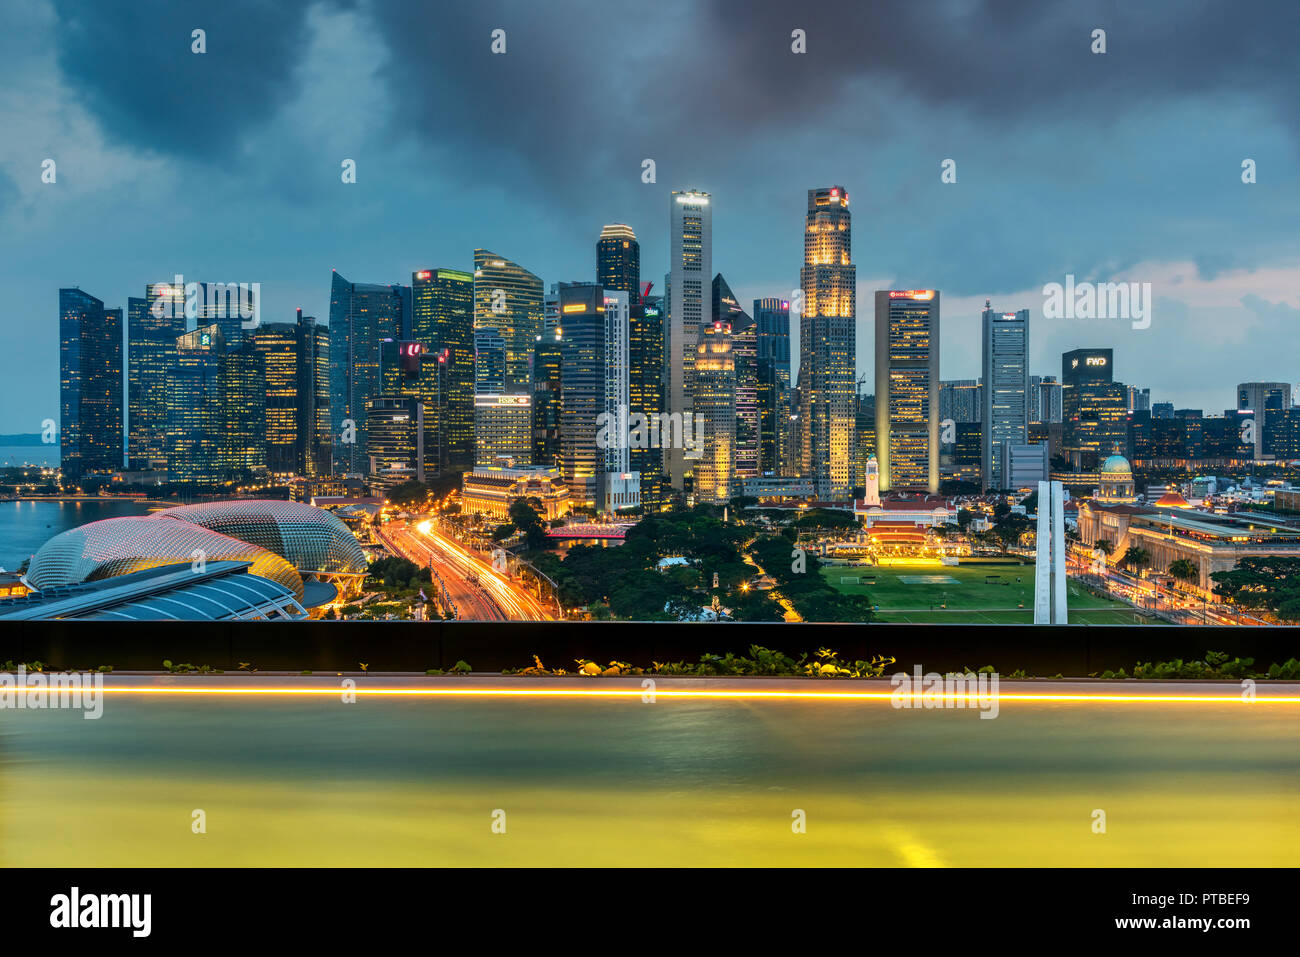 Infinity pool and financial district skyline at dusk, Singapore Stock Photo